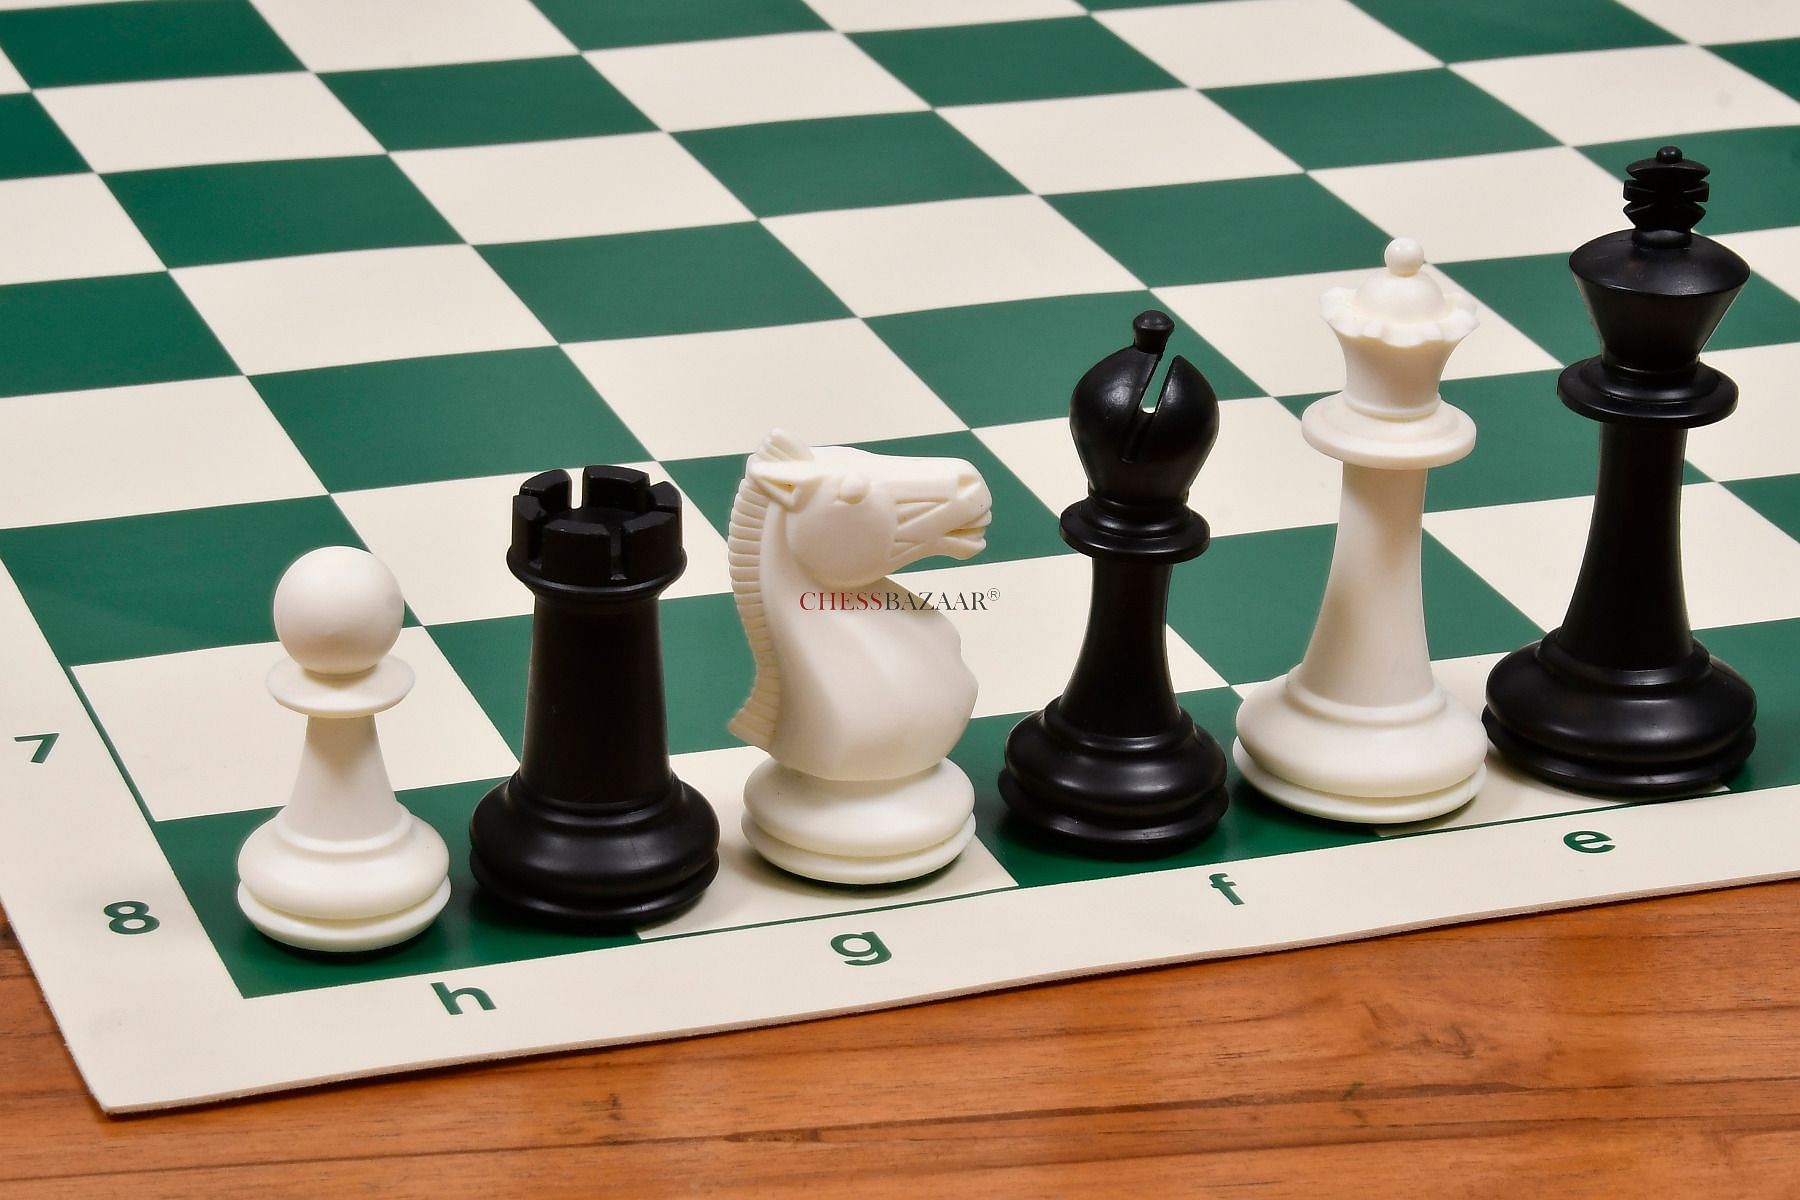 Wholesale Custom plastic game pawns board game pieces wholesale